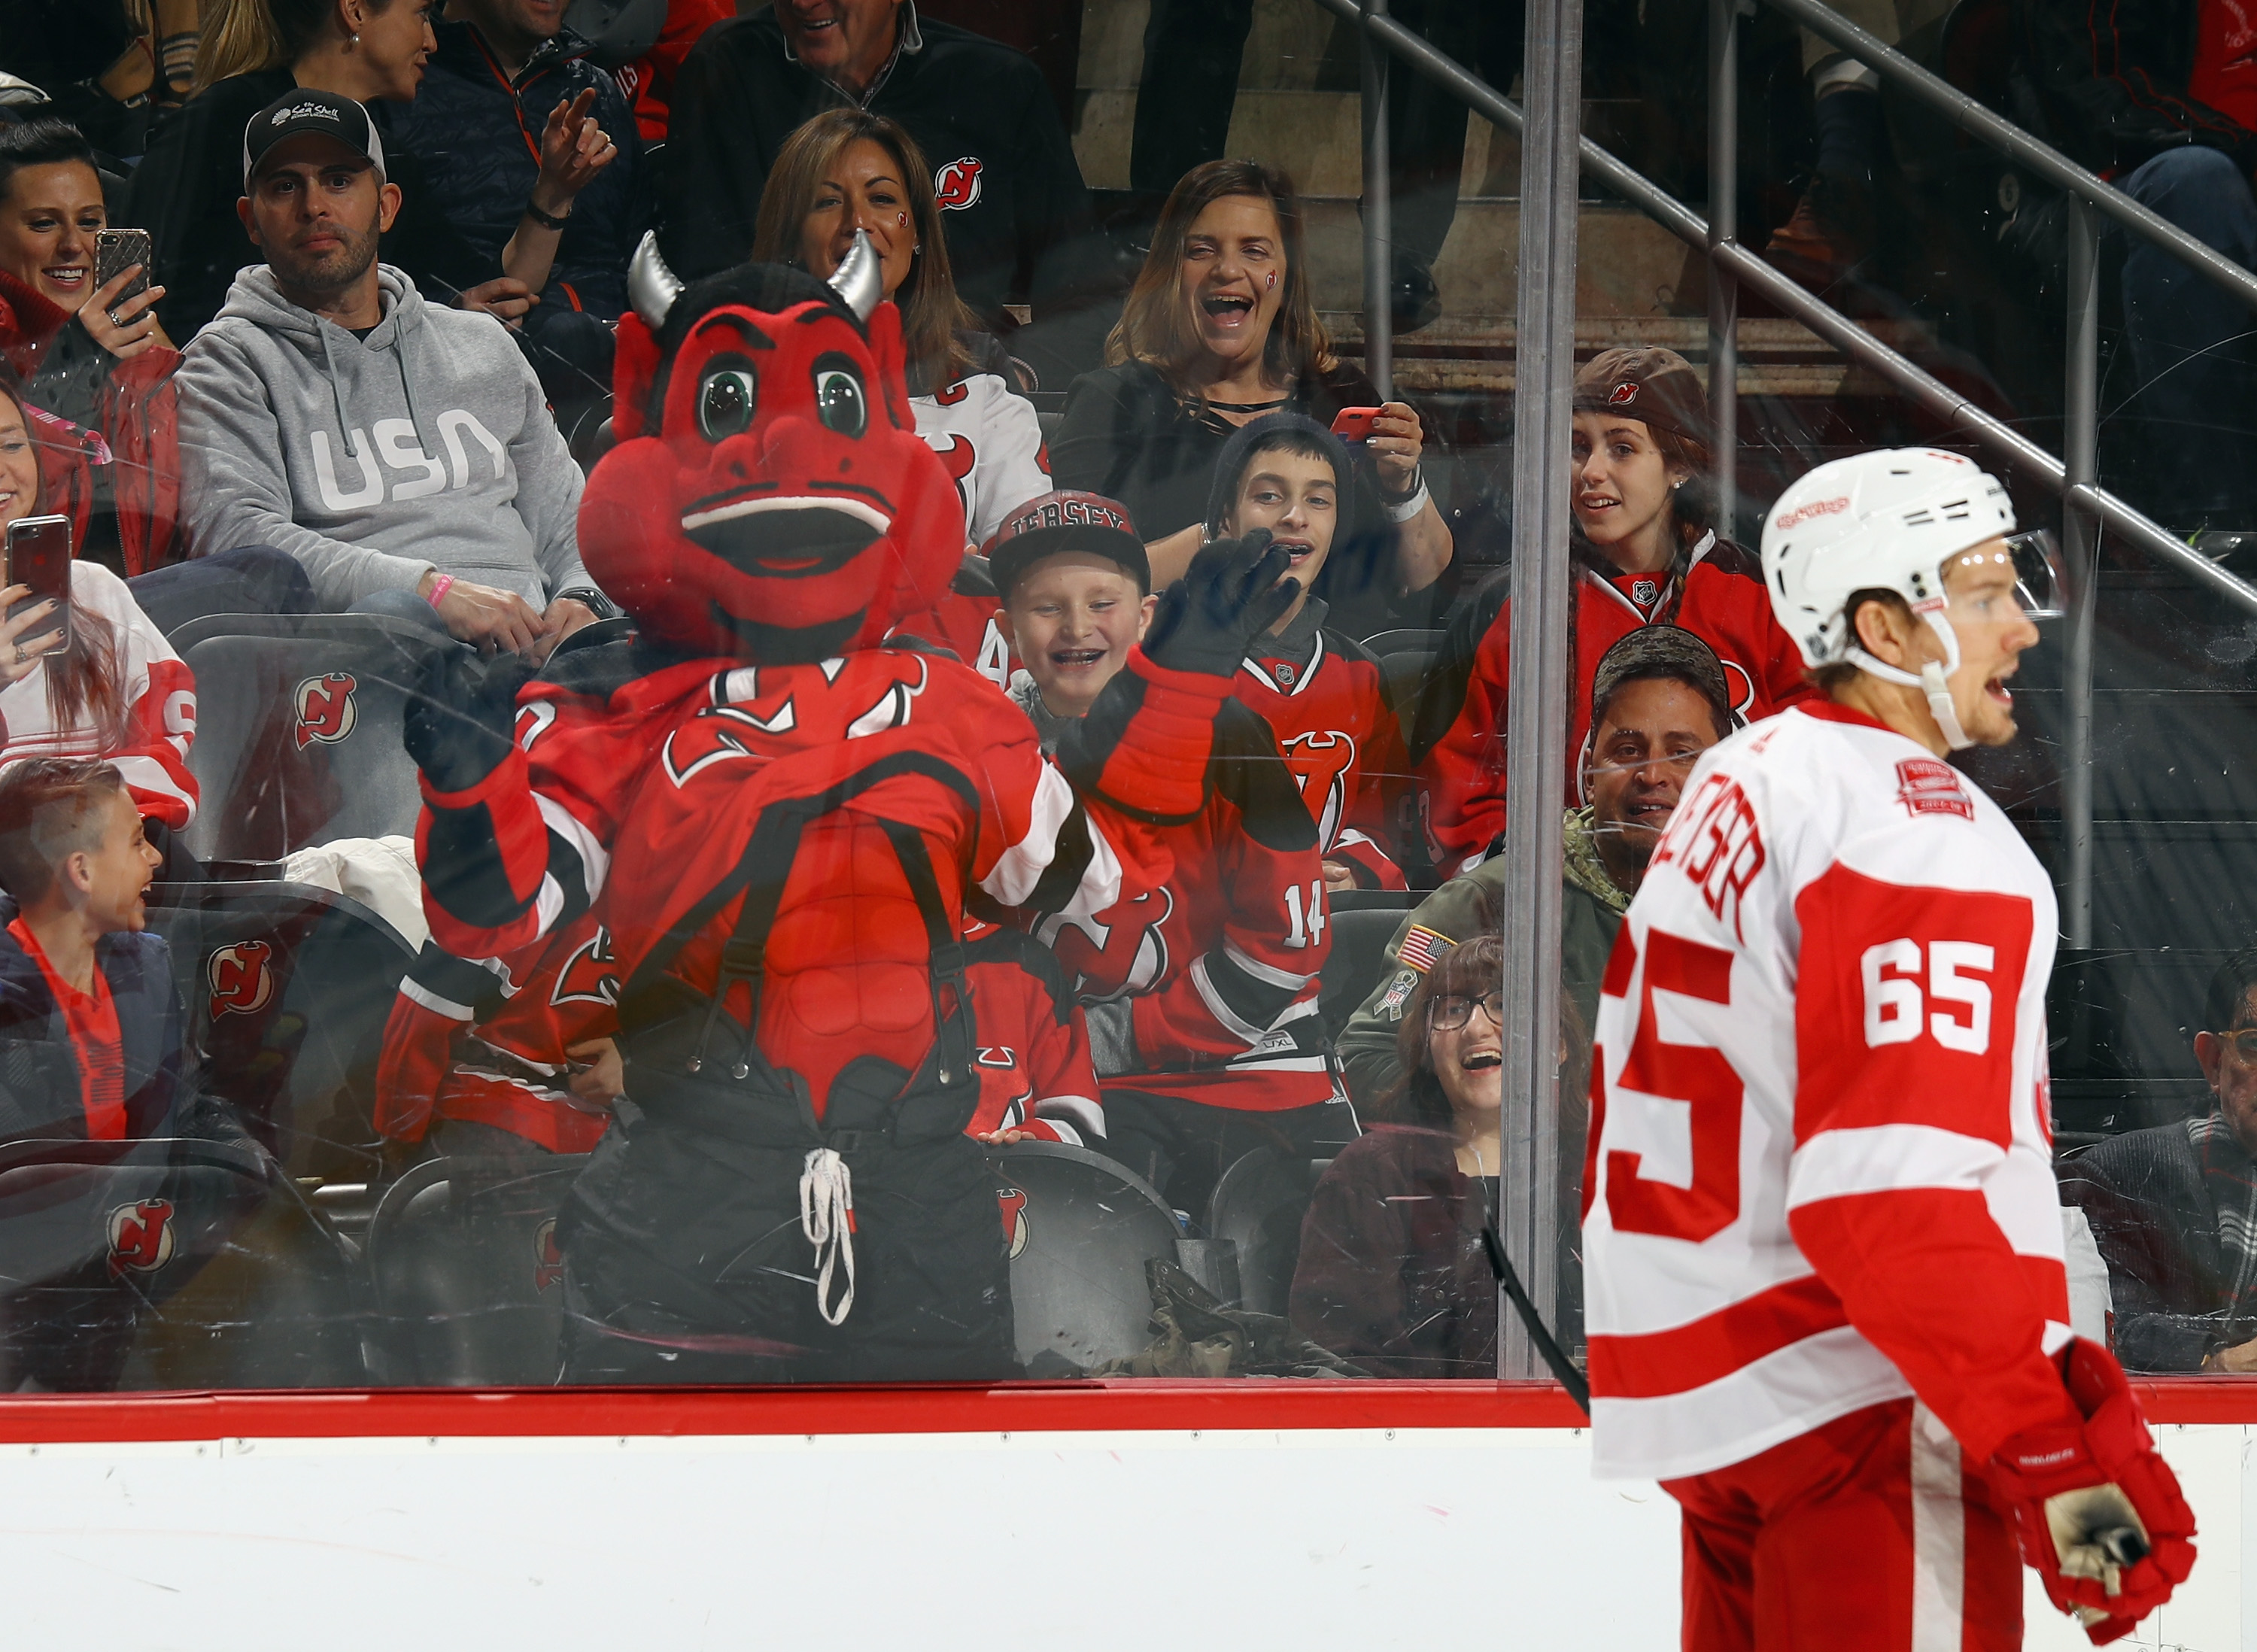 New Jersey Devils News: Detroit Red Wings visit The Rock